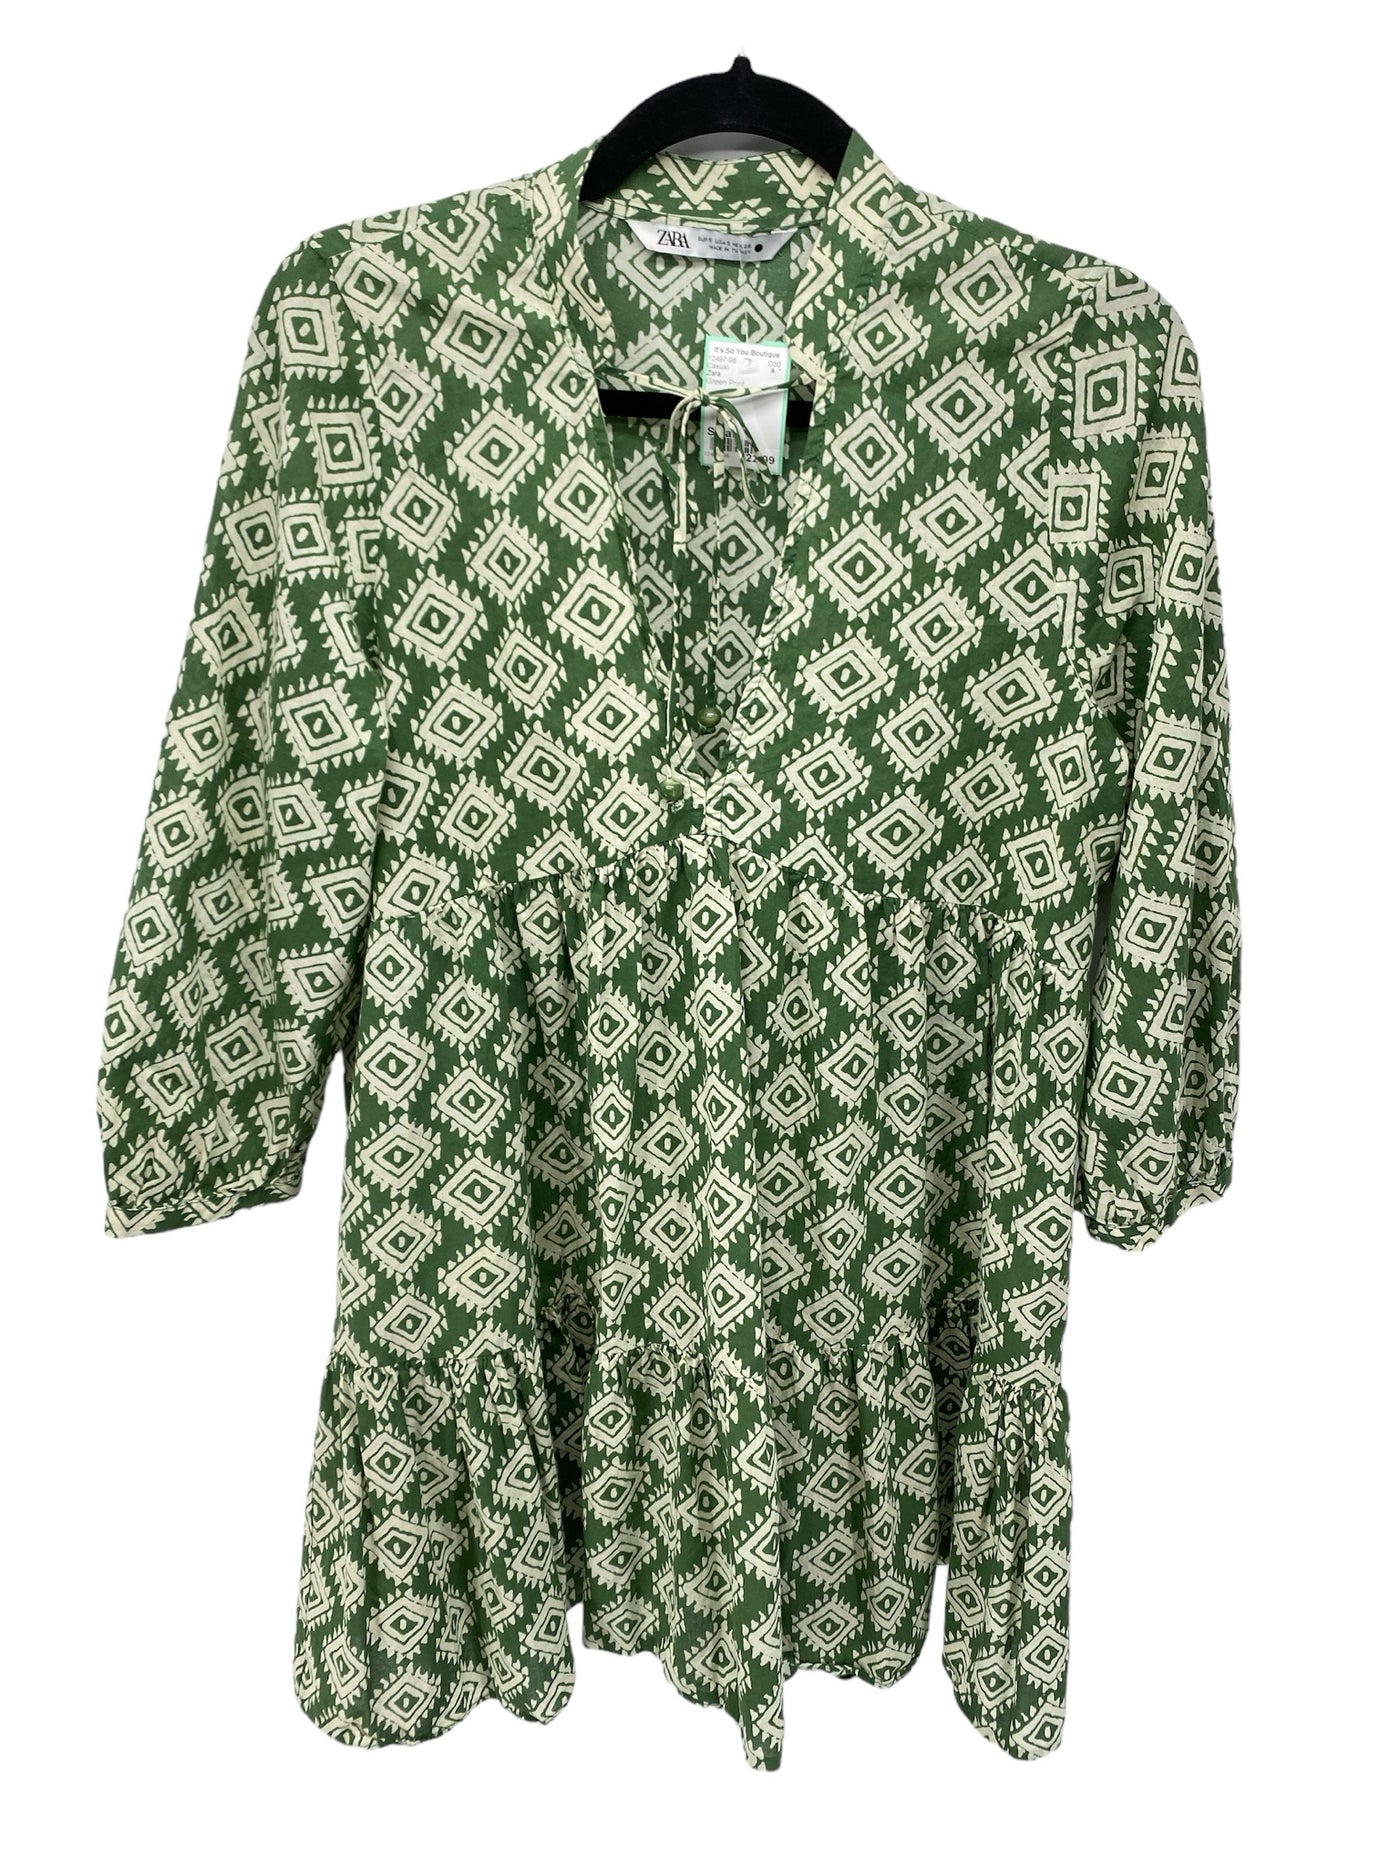 Zara Misses Size Small Green Print Casual